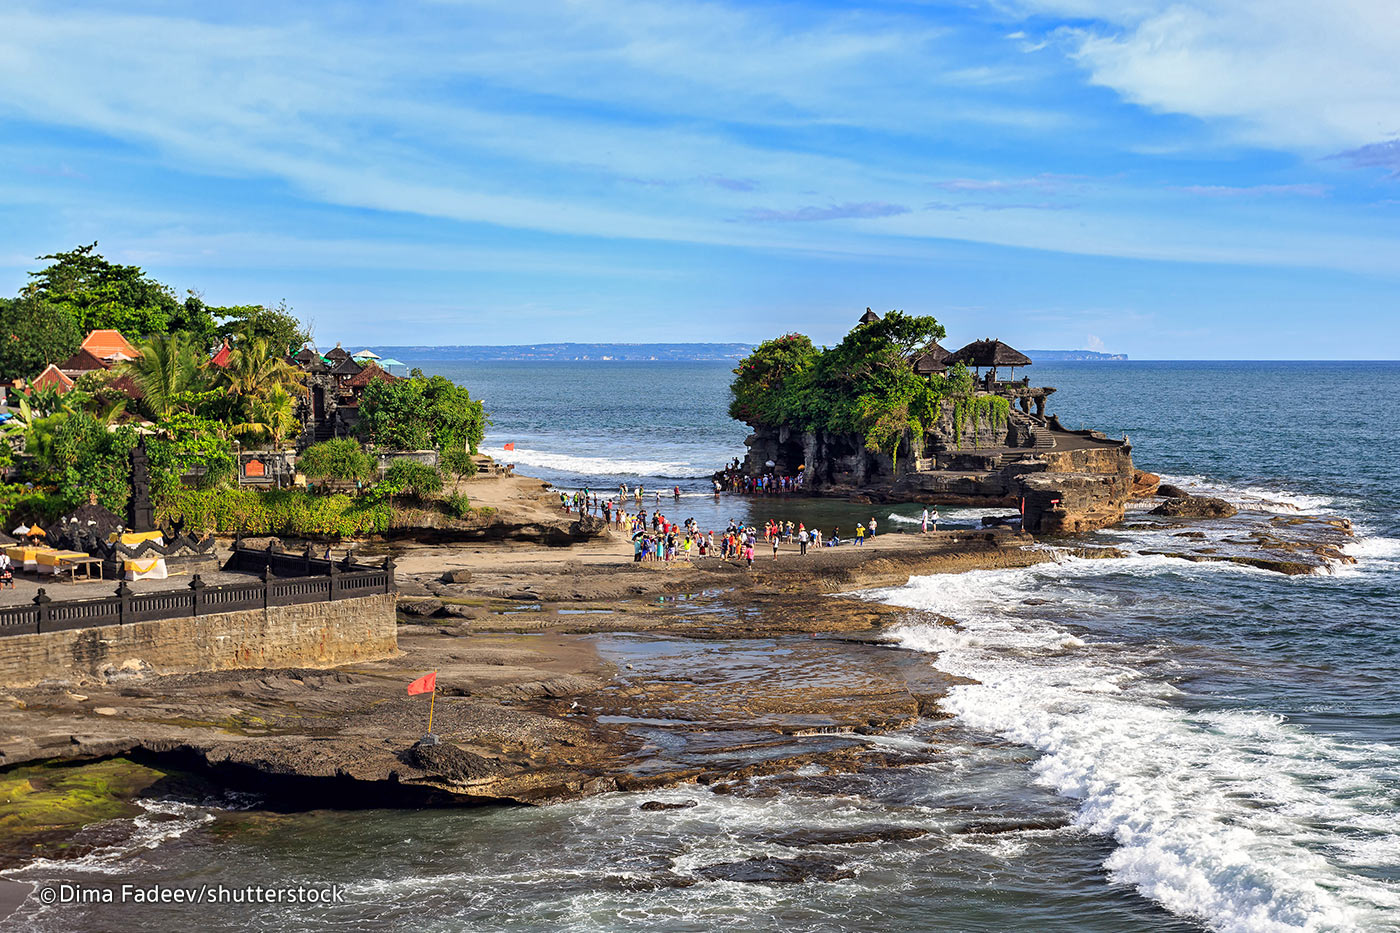 15 Things To Do in West Bali Indonesia Magical Island AllIndonesiaTourism com